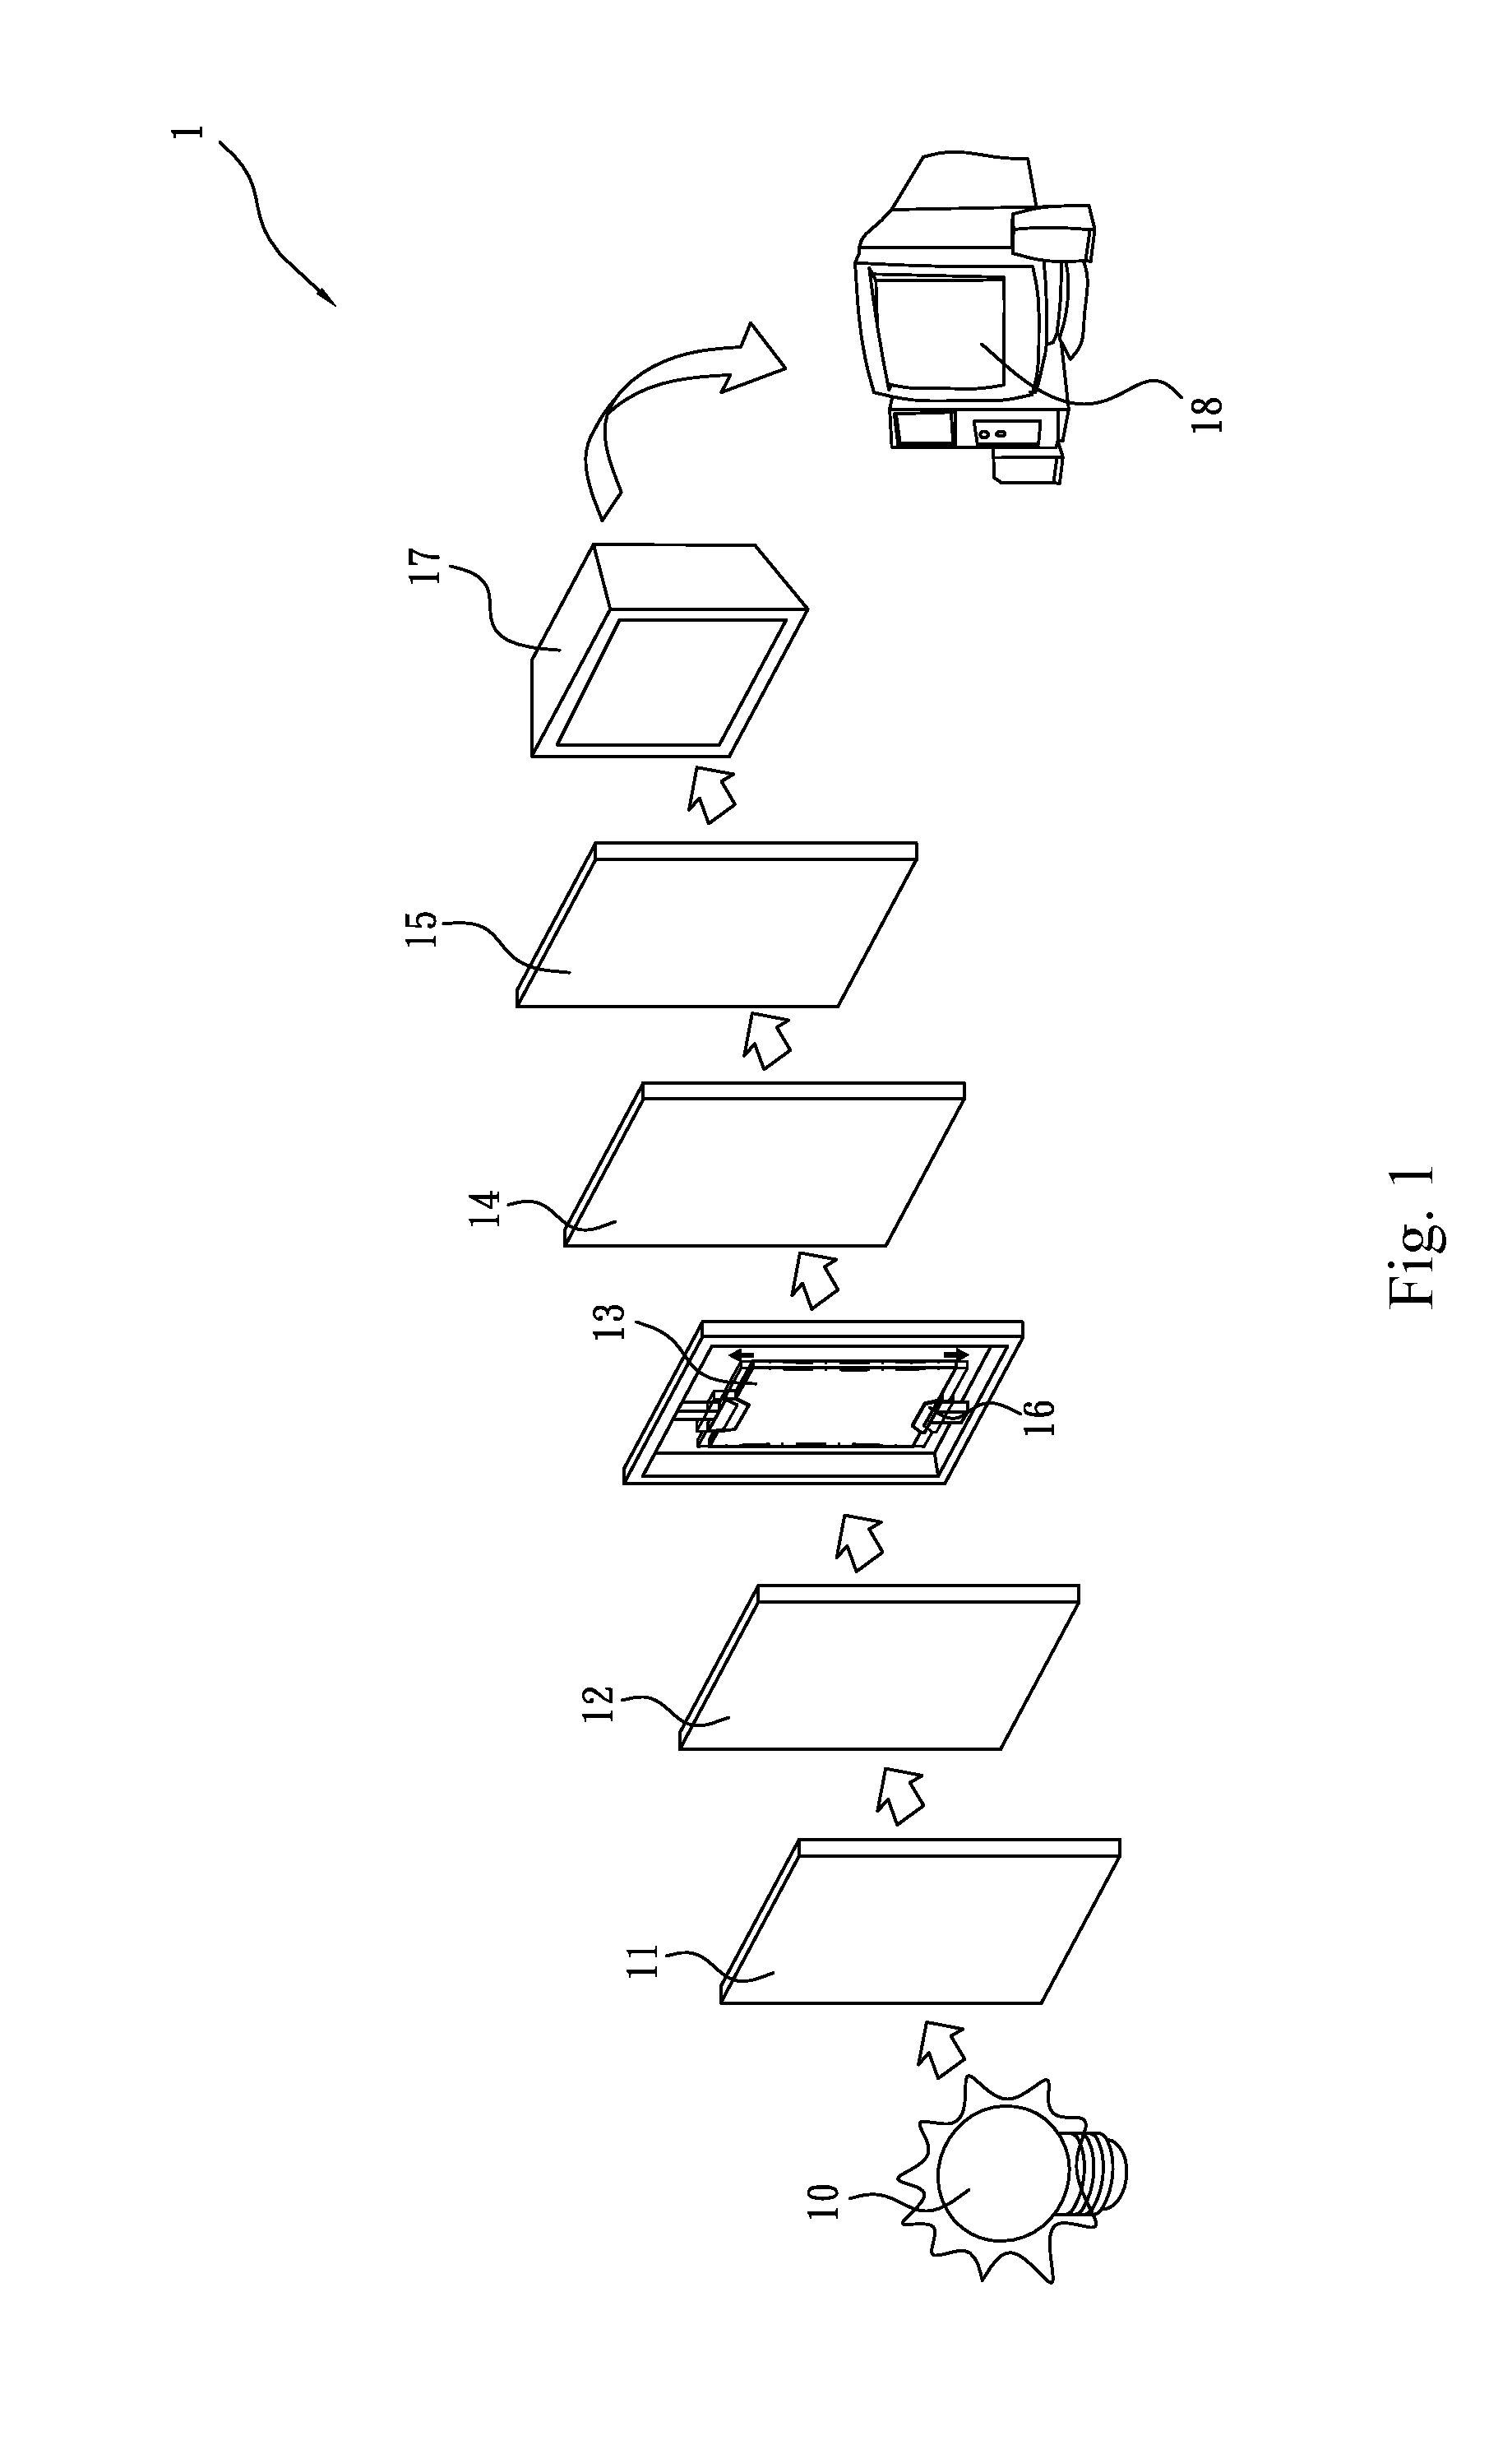 Apparatus for quantifying unknown stress and residual stress of a material and method thereof